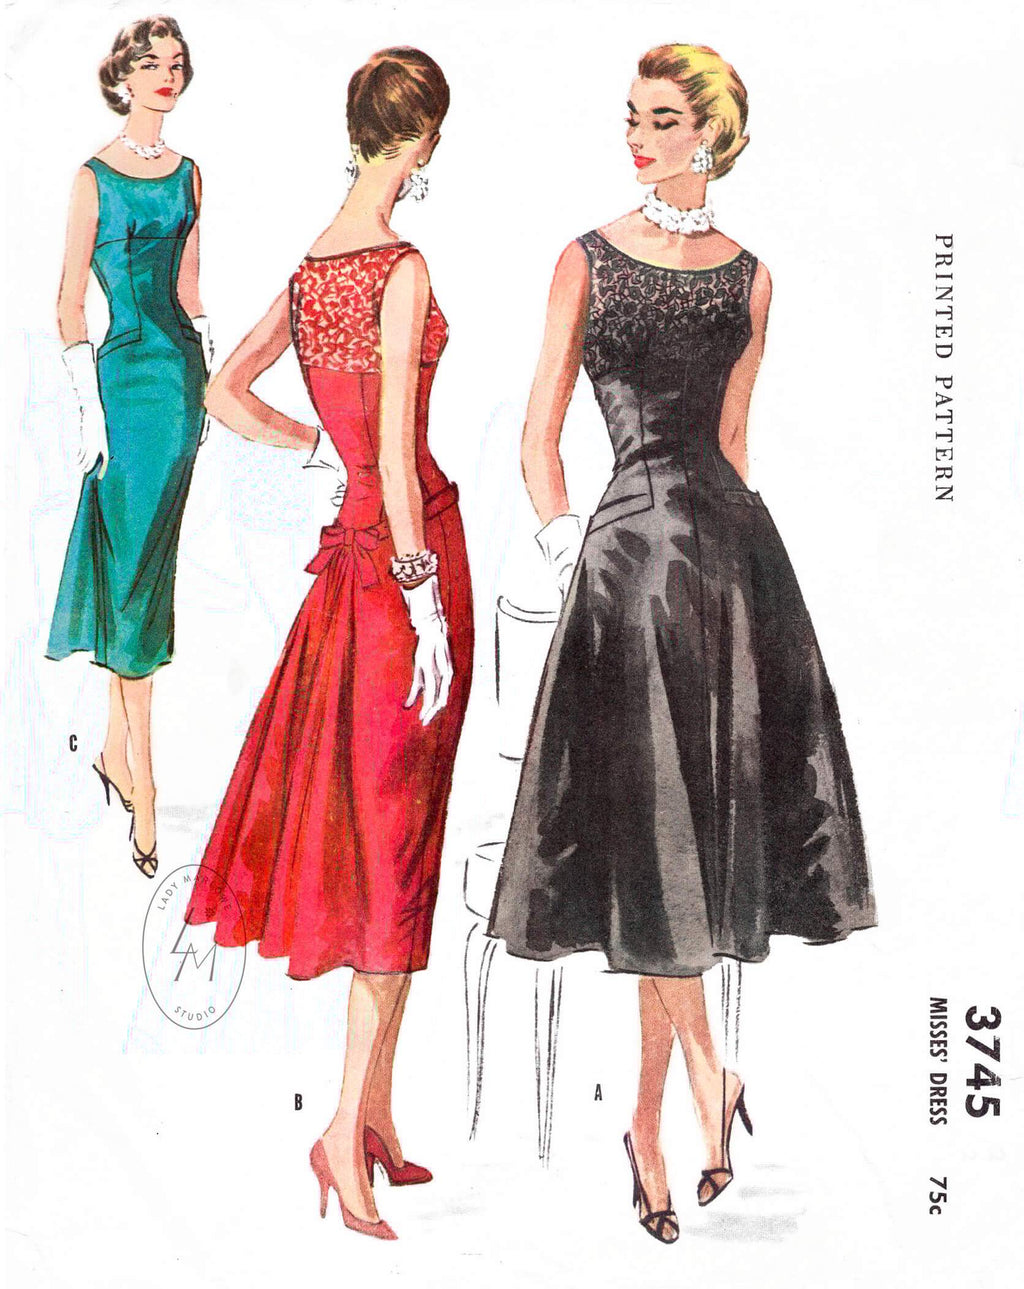 McCall's 3745 1956 cocktail dress empire waist swing skirt vintage sewing pattern reproduction